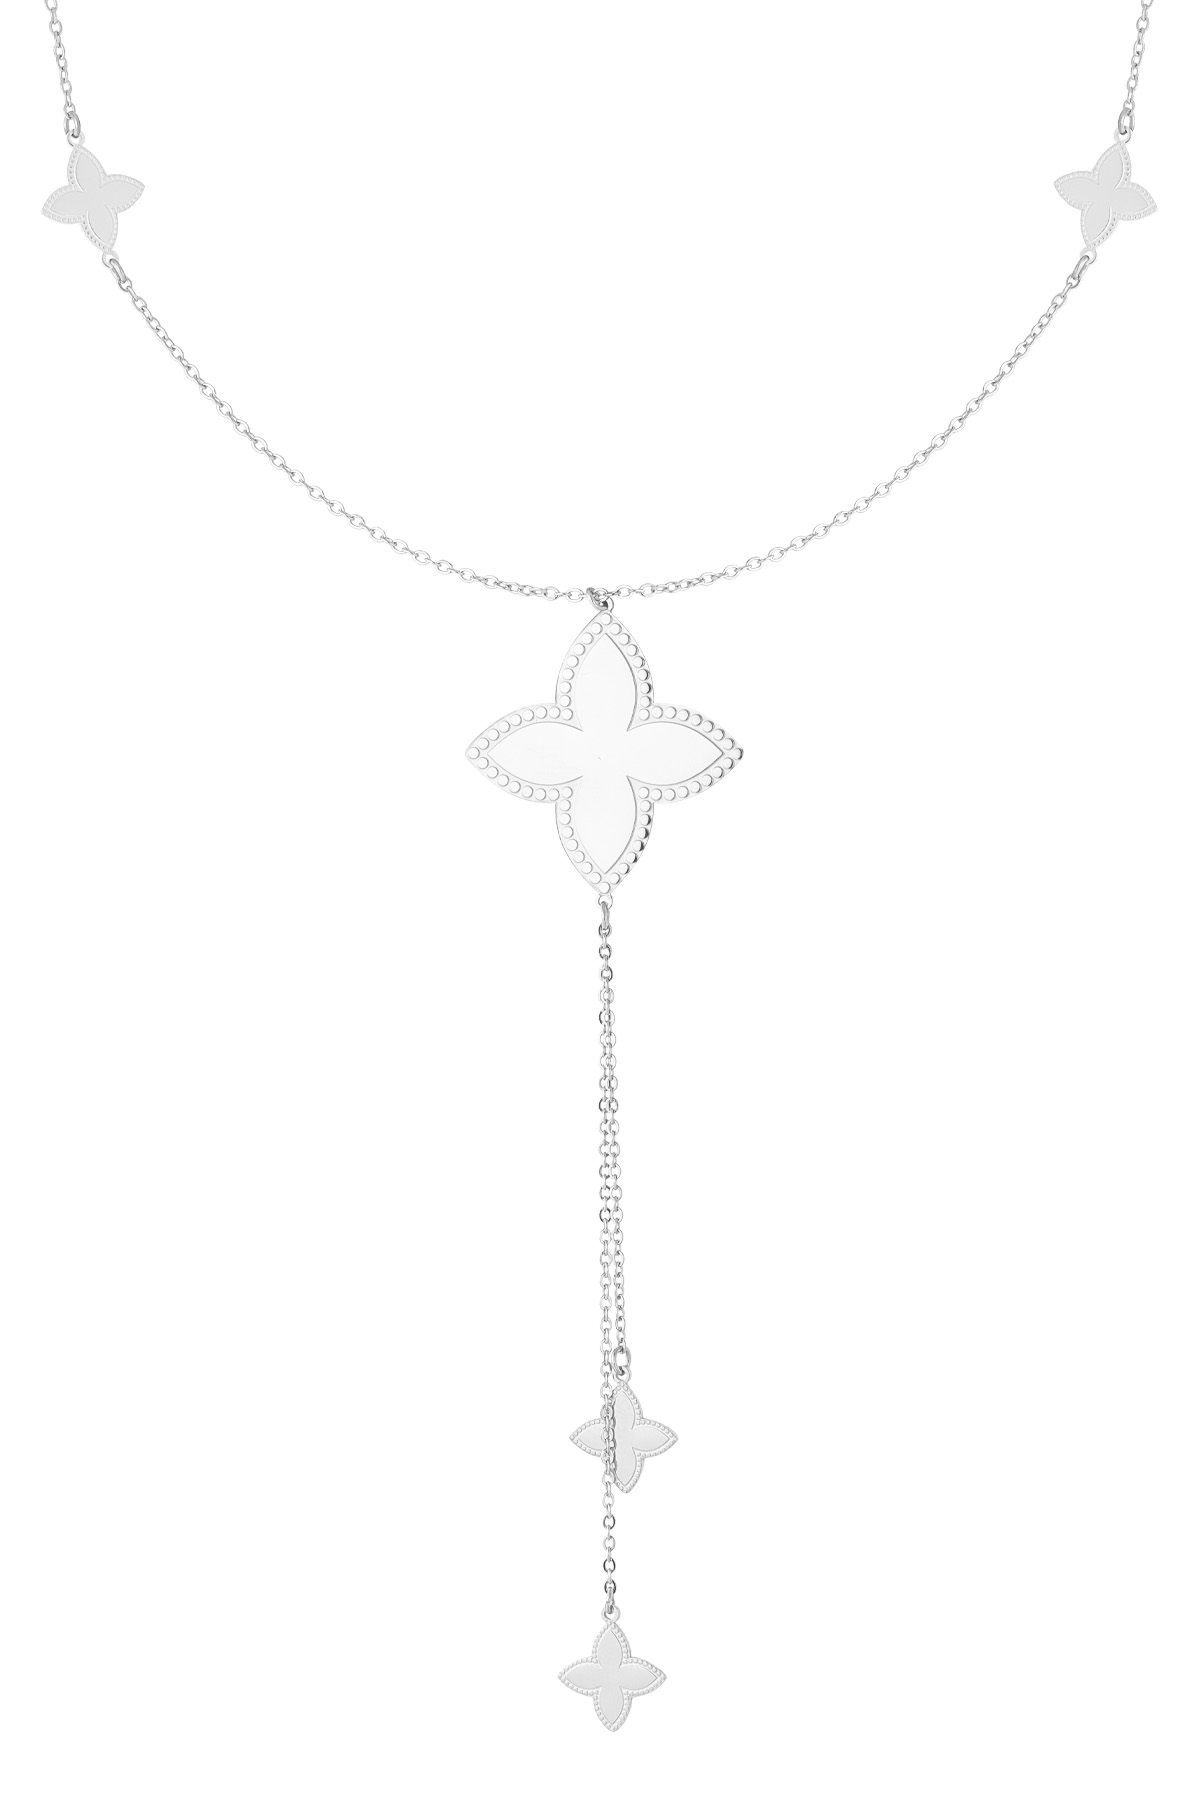 Long necklace with various clover charms - silver  h5 